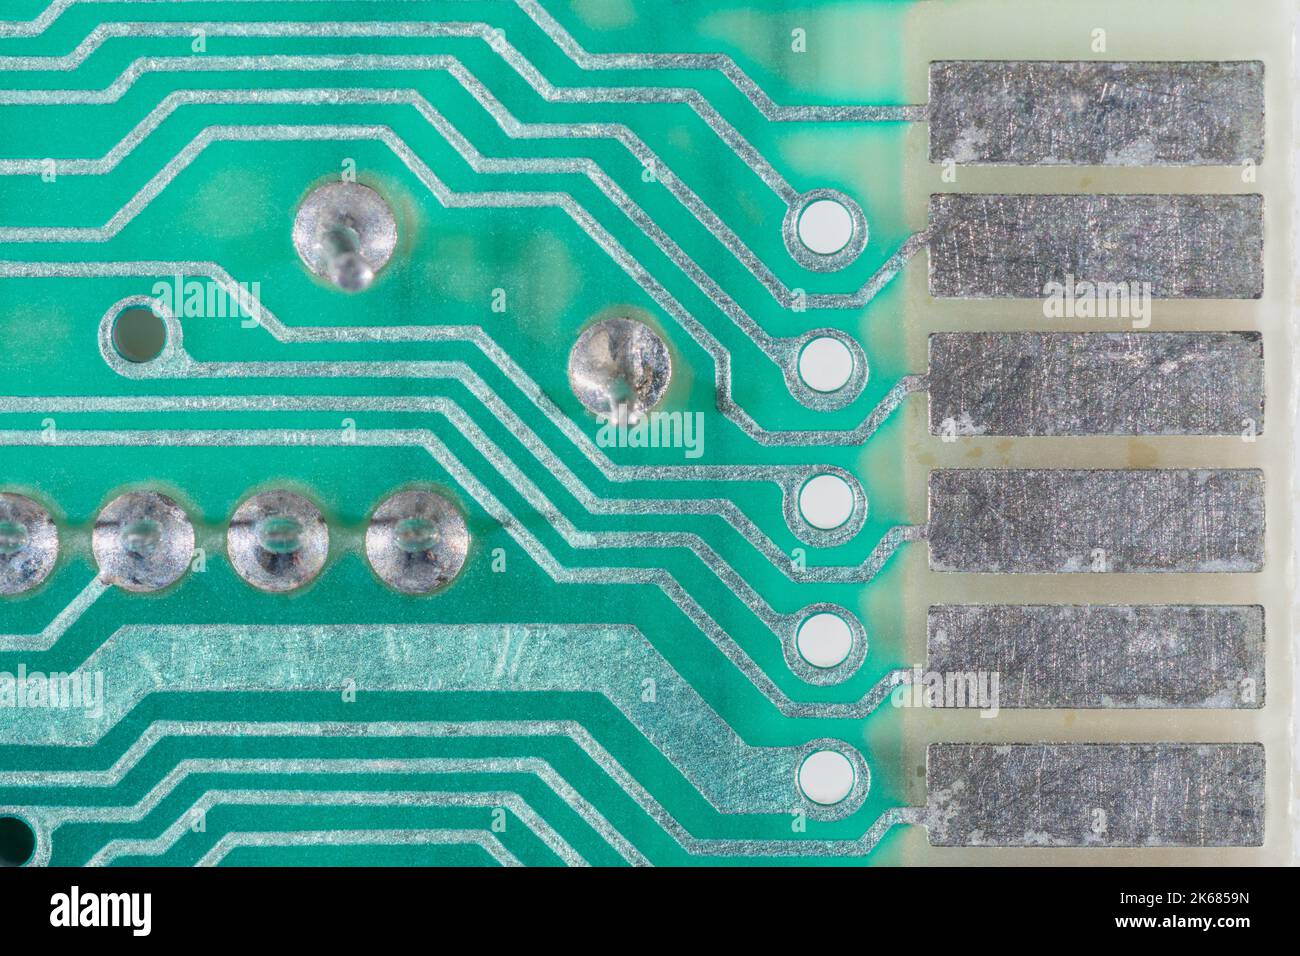 Close-up of tinned edge connector and soldered through-hole components on green PCB motherboard of vintage 1982 Sinclair ZX Spectrum home computer. Stock Photo